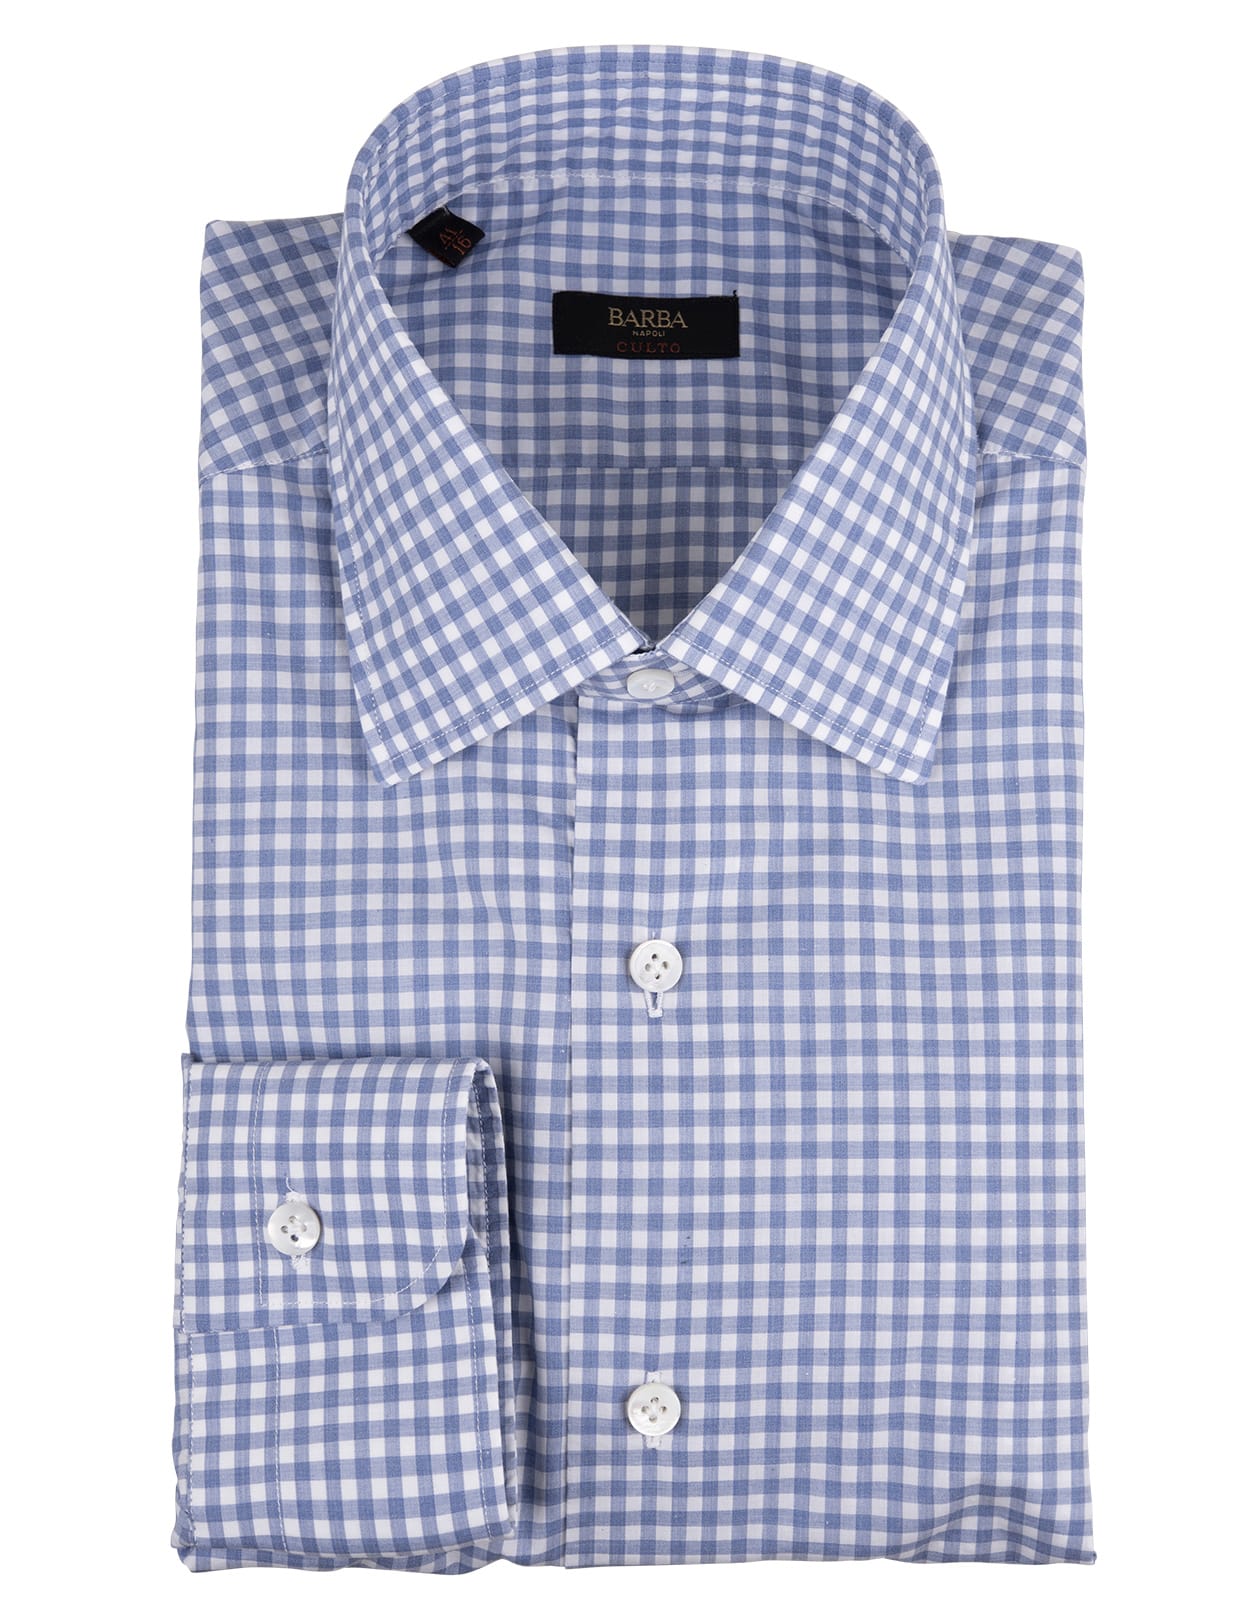 Barba Napoli Man Cotton Shirt With White And Light Blue Vichy Pattern